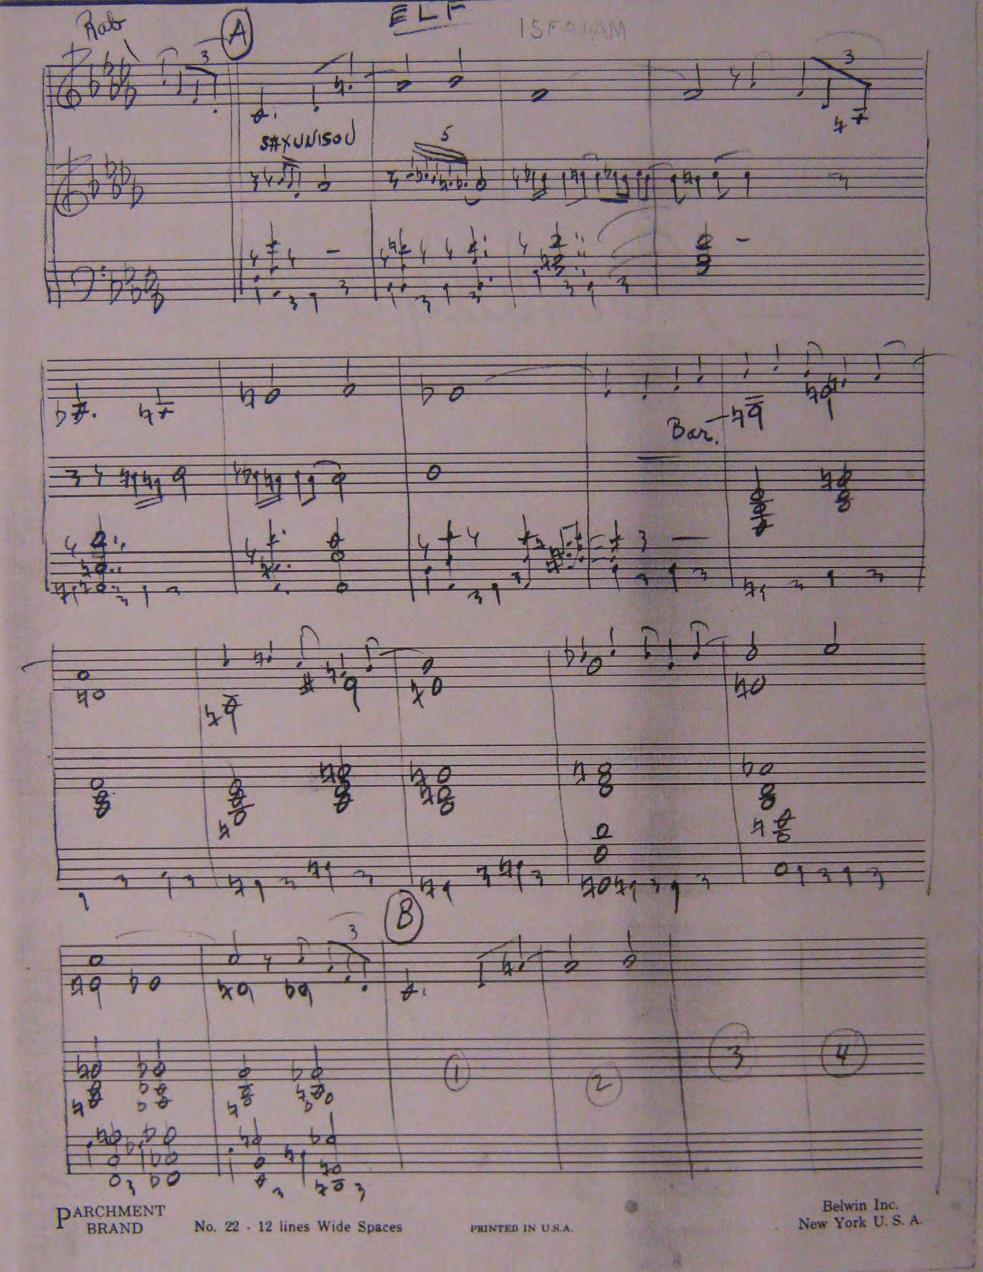 This is Billy Strayhorn s sketch score, comleted in 196.